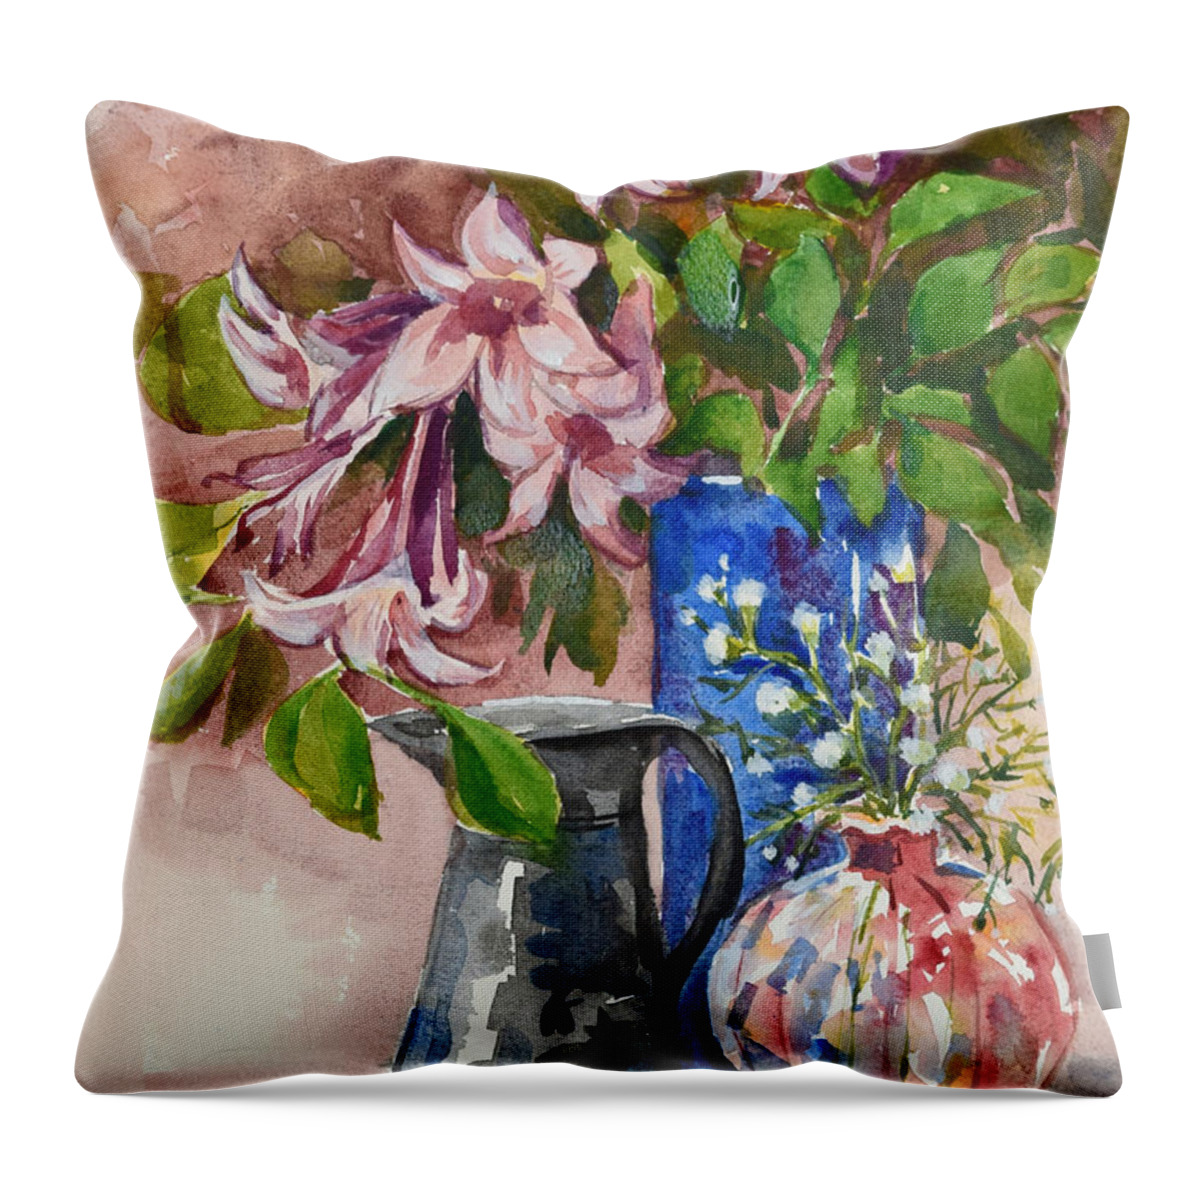 Pink Flowers Throw Pillow featuring the painting Asian Pink Lilies by Jyotika Shroff